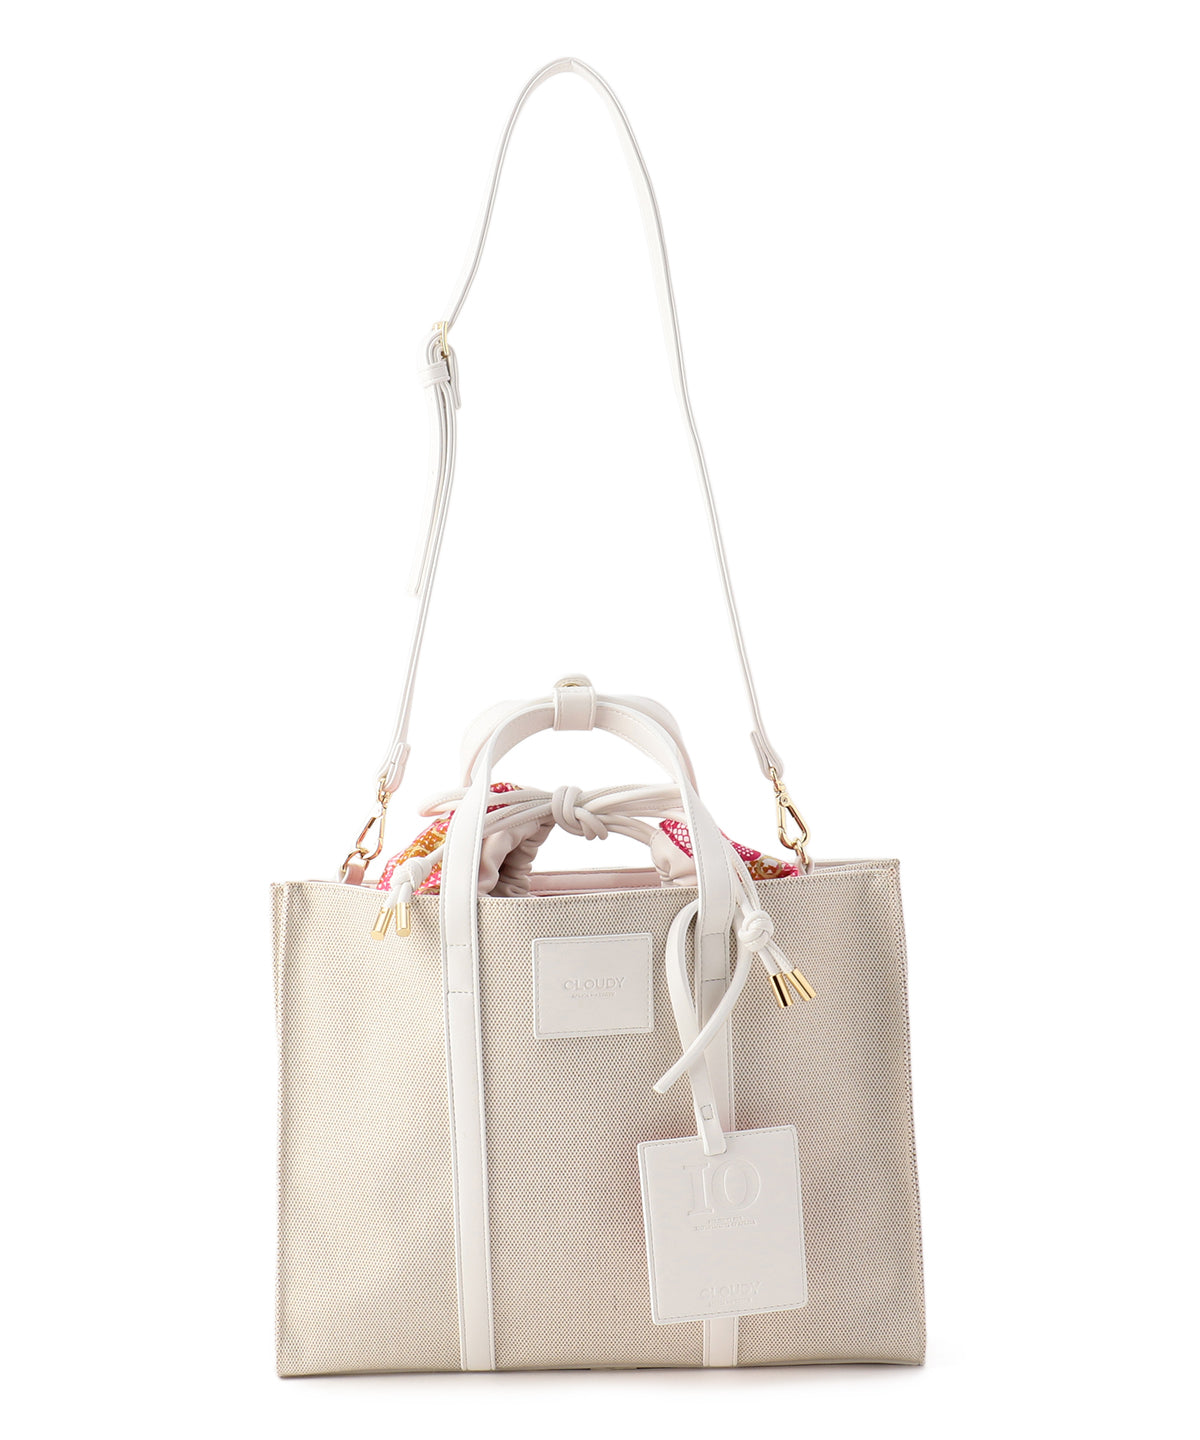 Square canvas tote Medium WHITE | バッグ | CLOUDY公式通販サイト